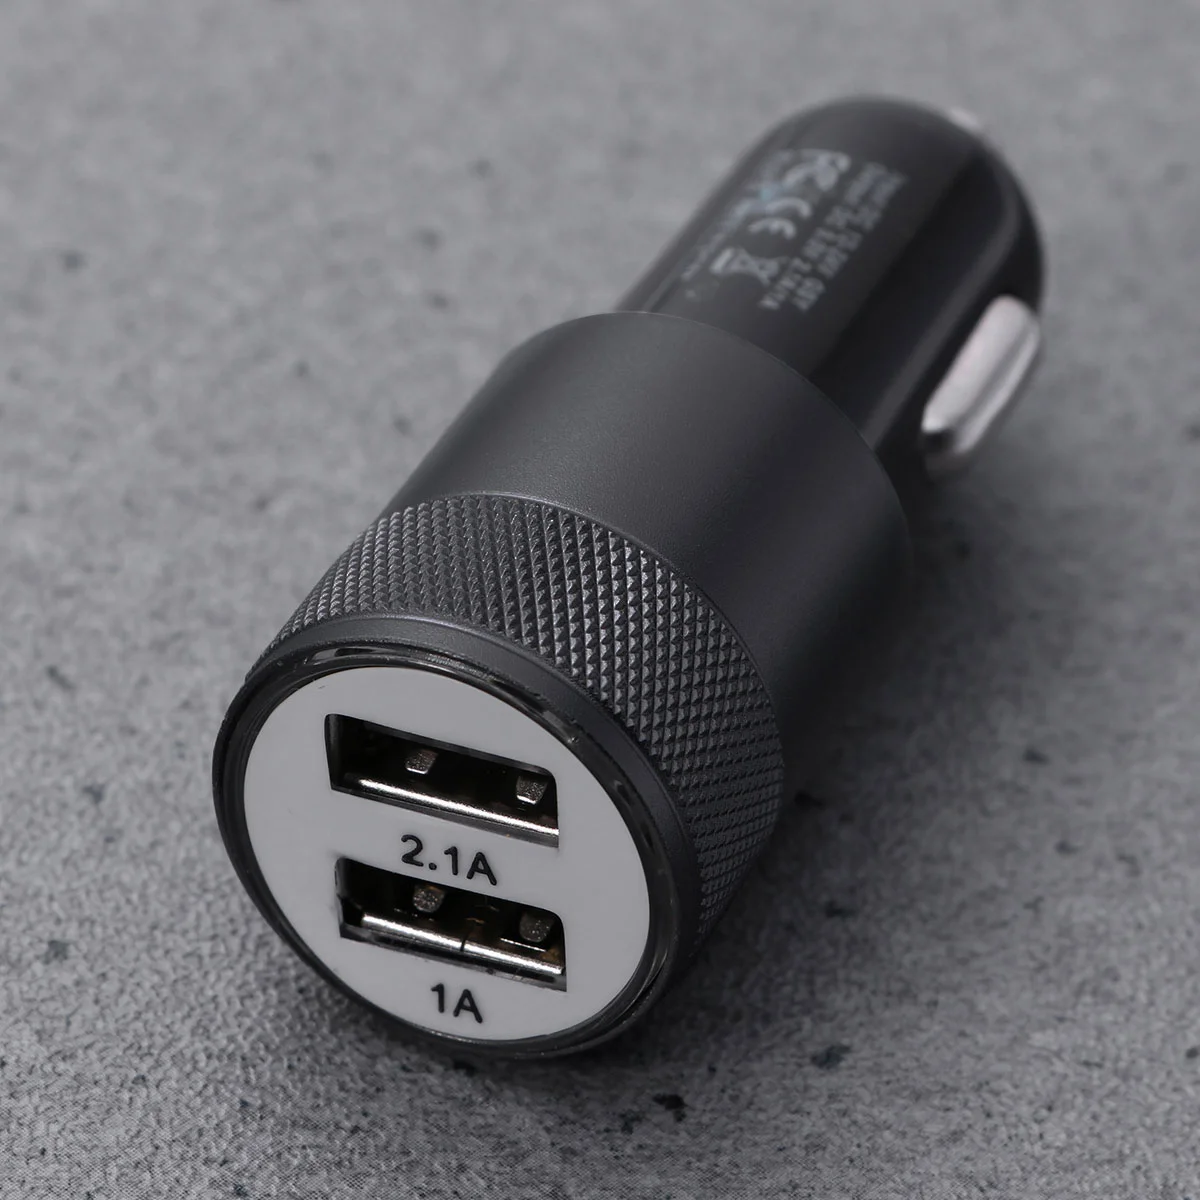 

2.1A 1A Universal Aluminum Alloy USB Ports Intelligent Charging Dual USB Car Charger For Mobile Phone Charger Power Supply